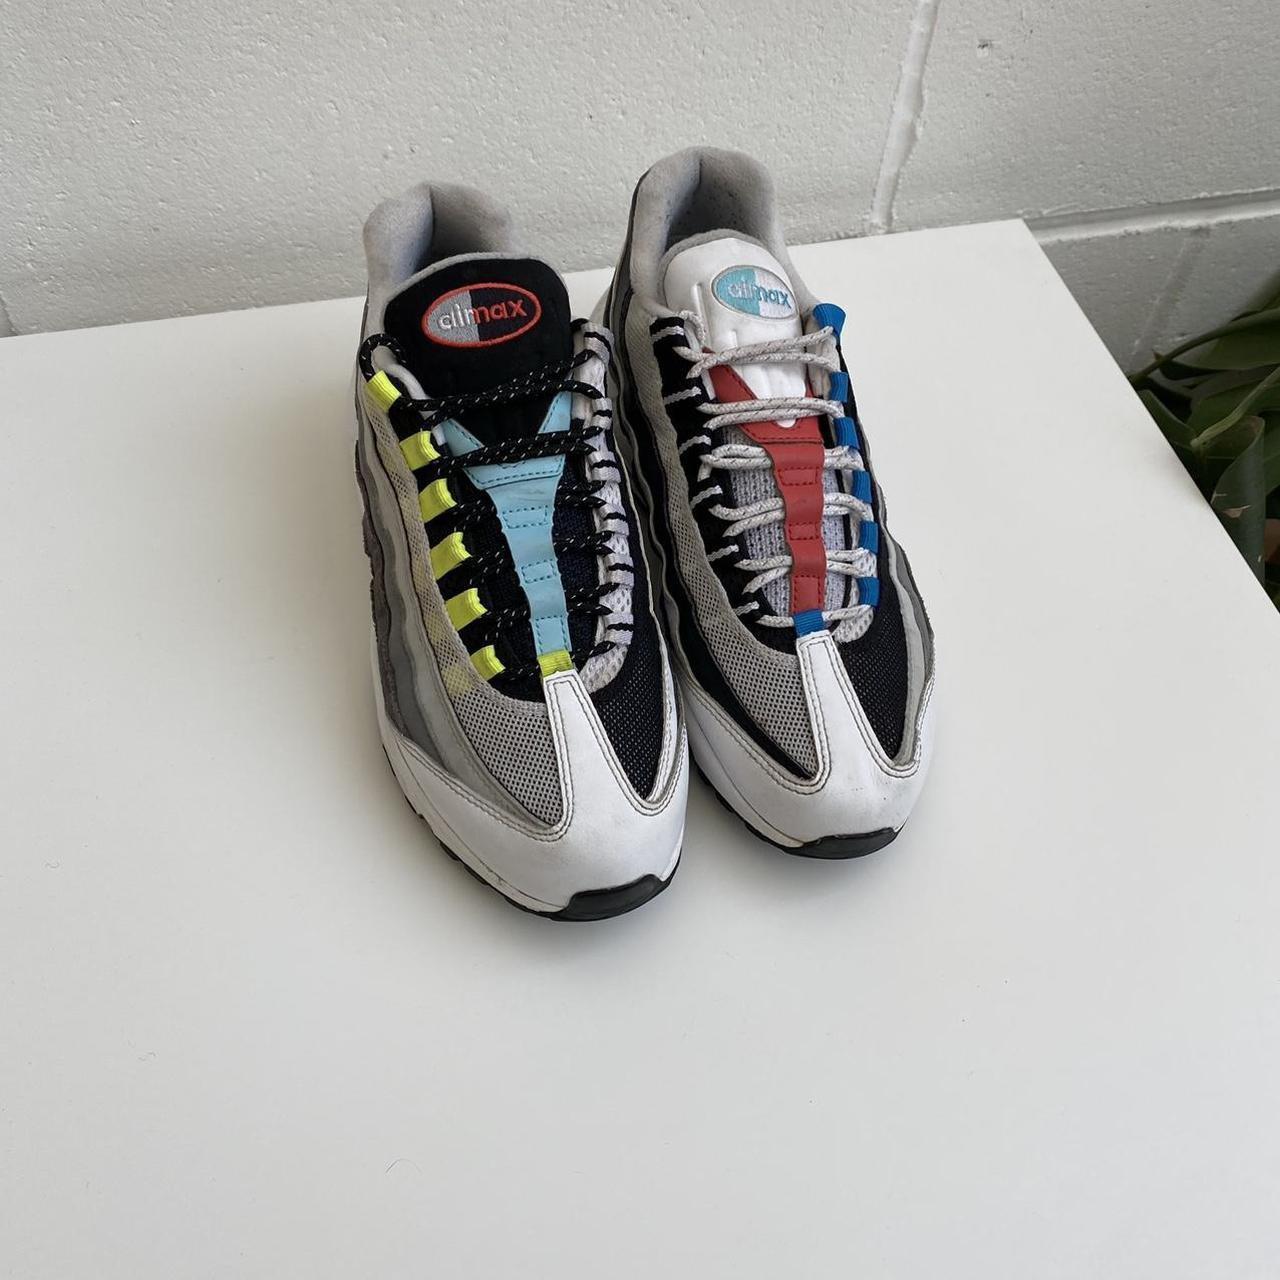 Nike Air Max 95 Greedy 2020 Trainers In White /... - Depop